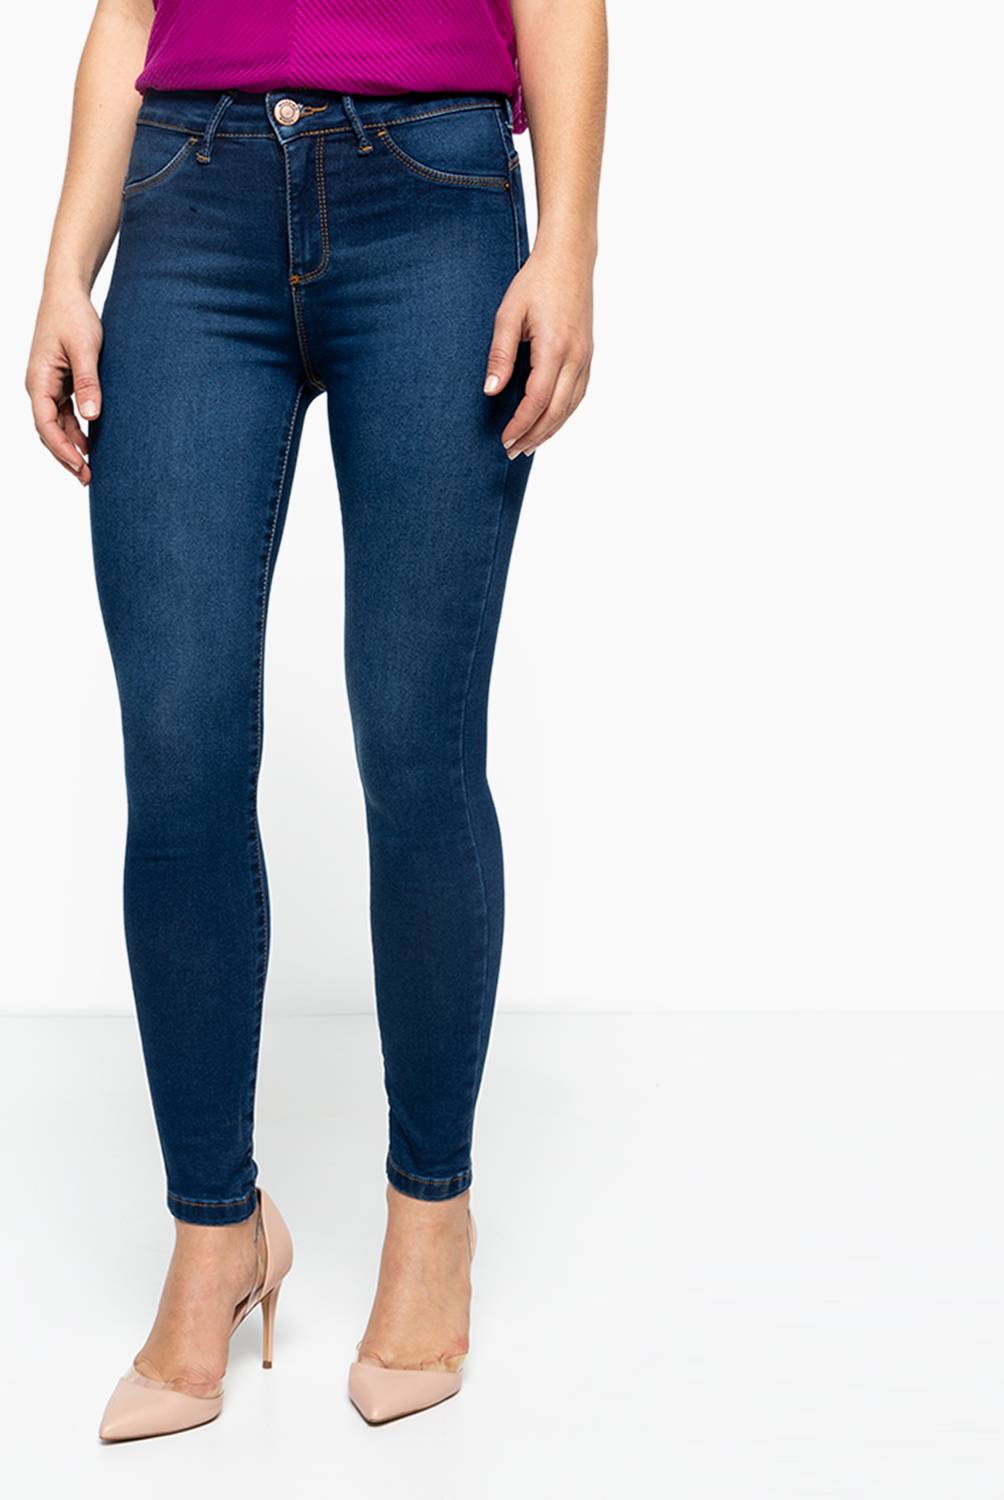 MOSSIMO - Jeans Mujer